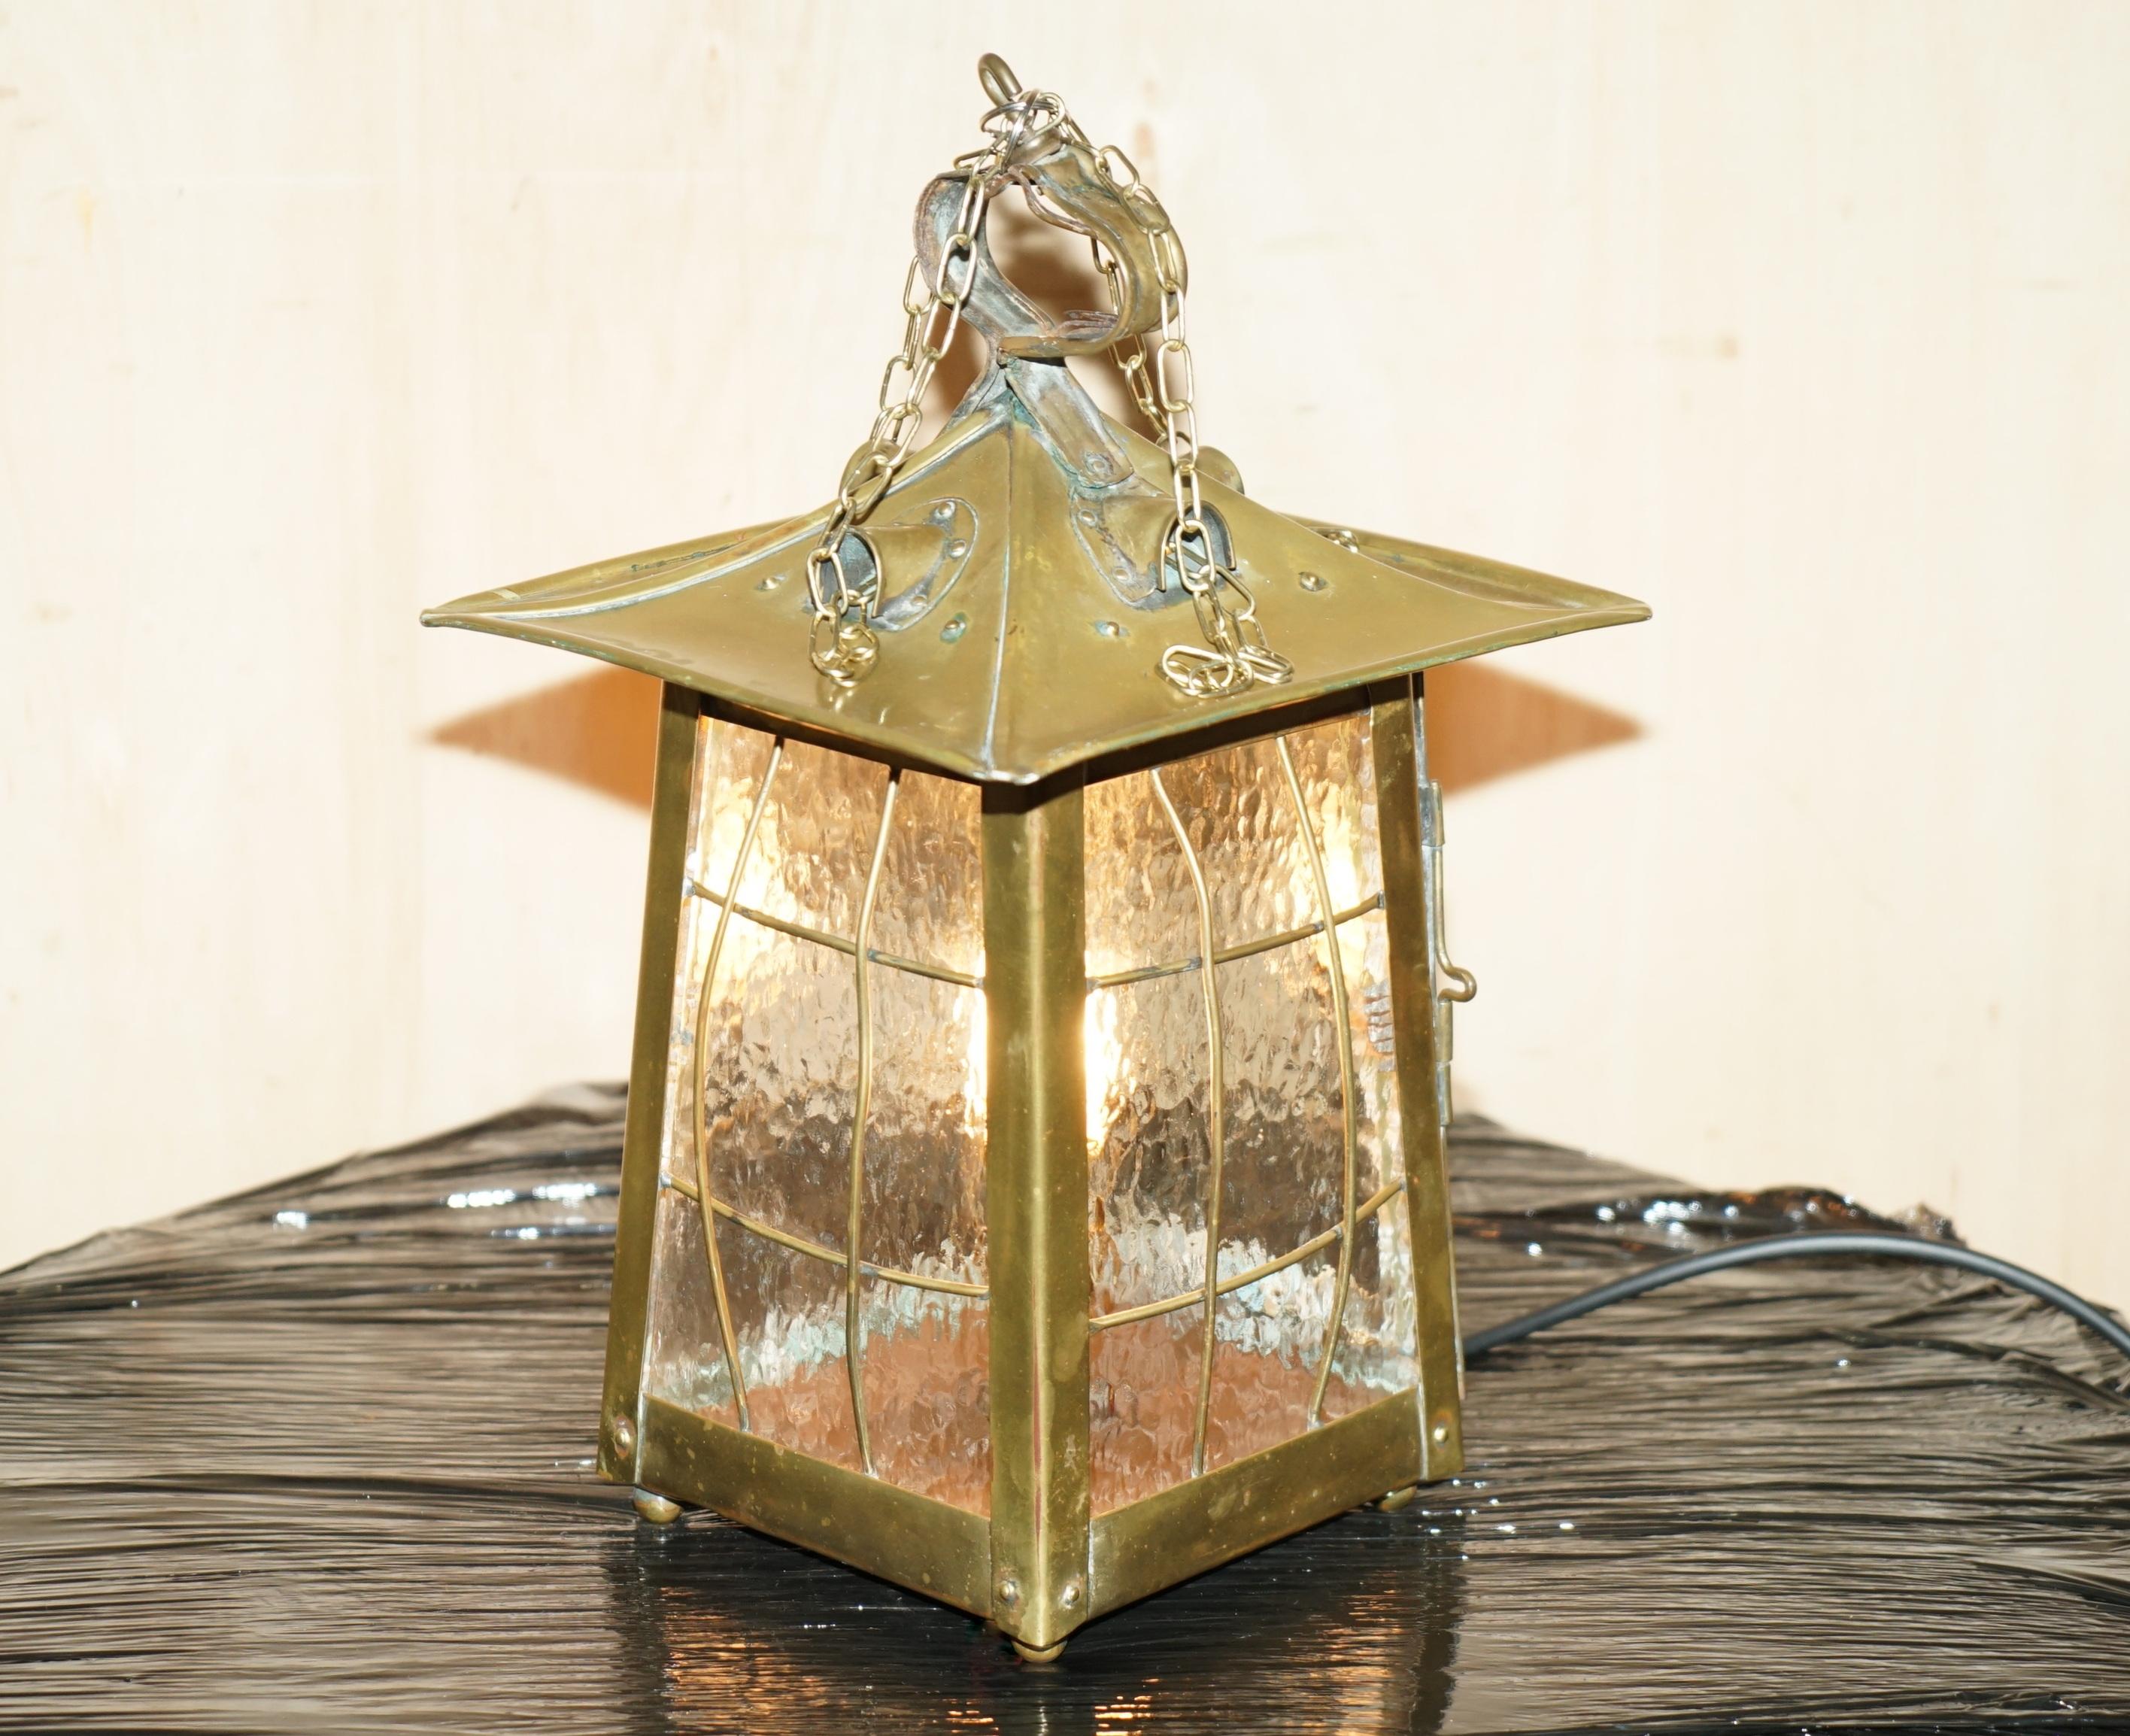 We are delighted to offer for sale this stunning antique original Art Nouveau brass hanging lantern which has been restored to use as a table lamp

A very good looking well made and decorative lamp, it has been fully serviced and restored as